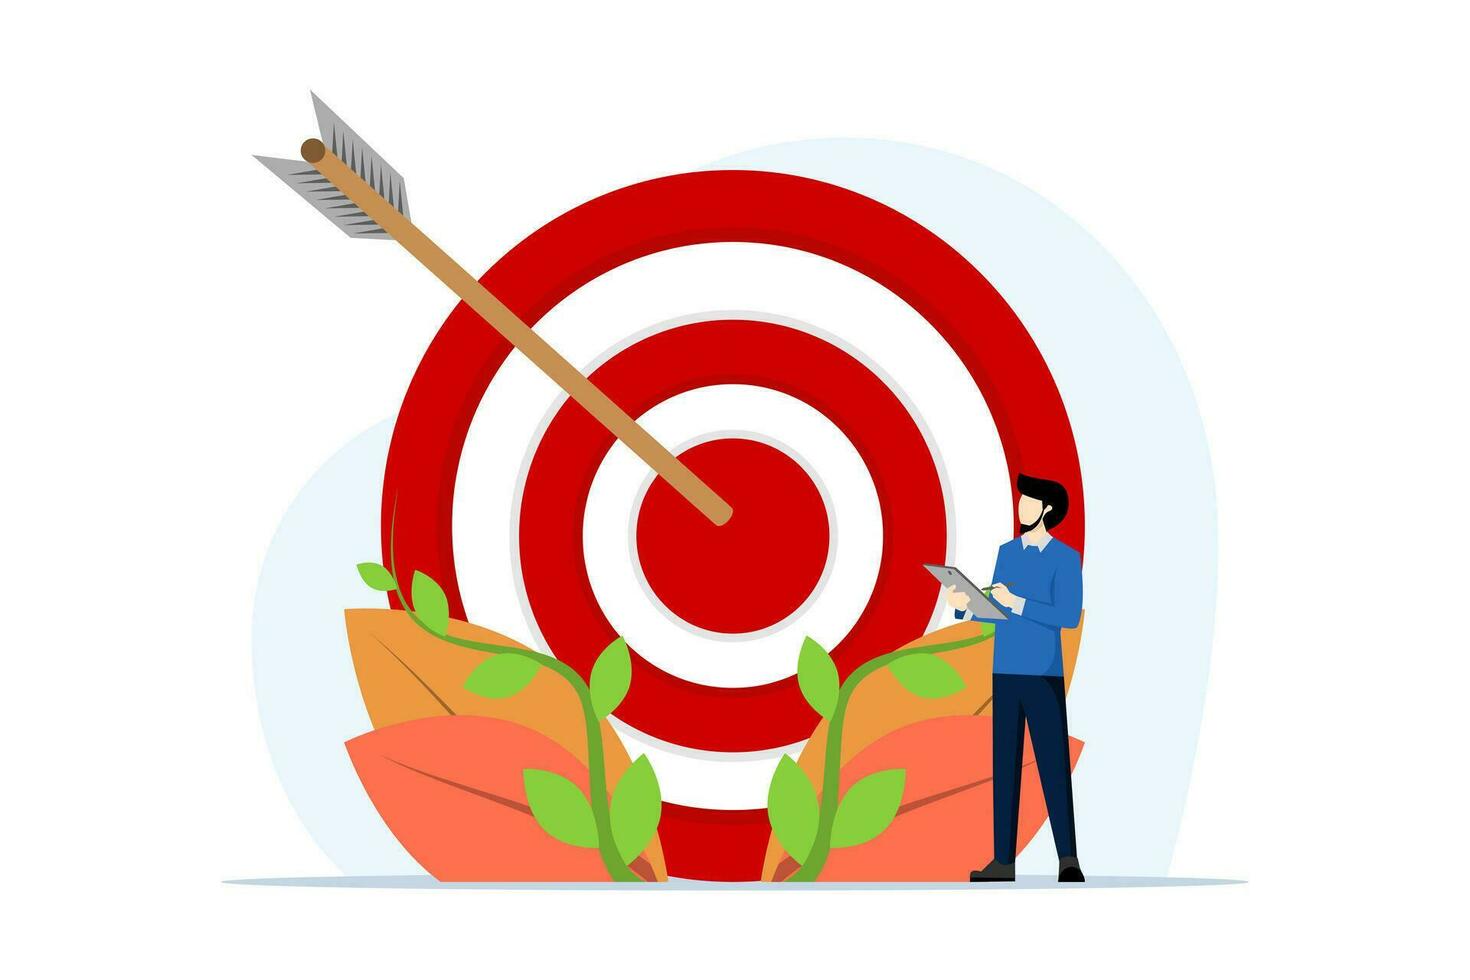 Concept of achieving business targets, A Businessman Standing Beside Red Target Circles And Arrows, Reaching Target Right In The Middle, Analyzing Achievement Results. flat vector illustration.